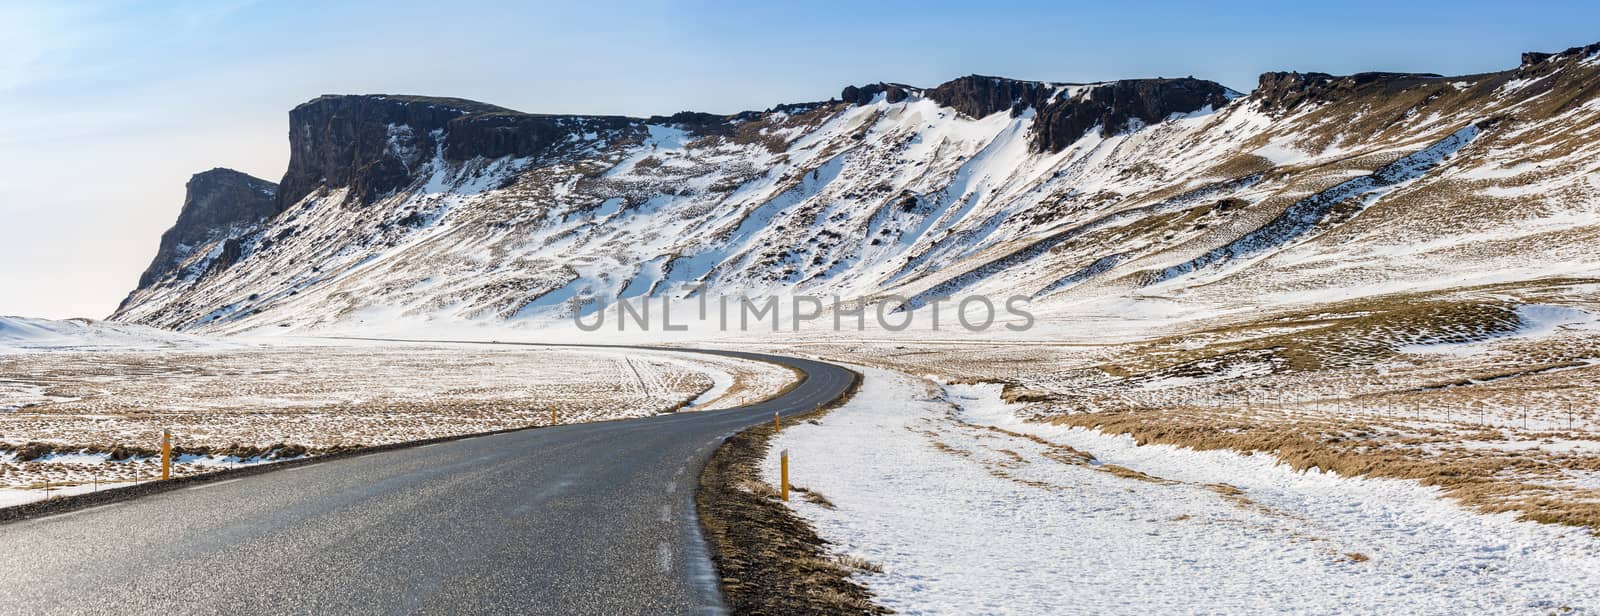 Road Winter Mountain Iceland by vichie81